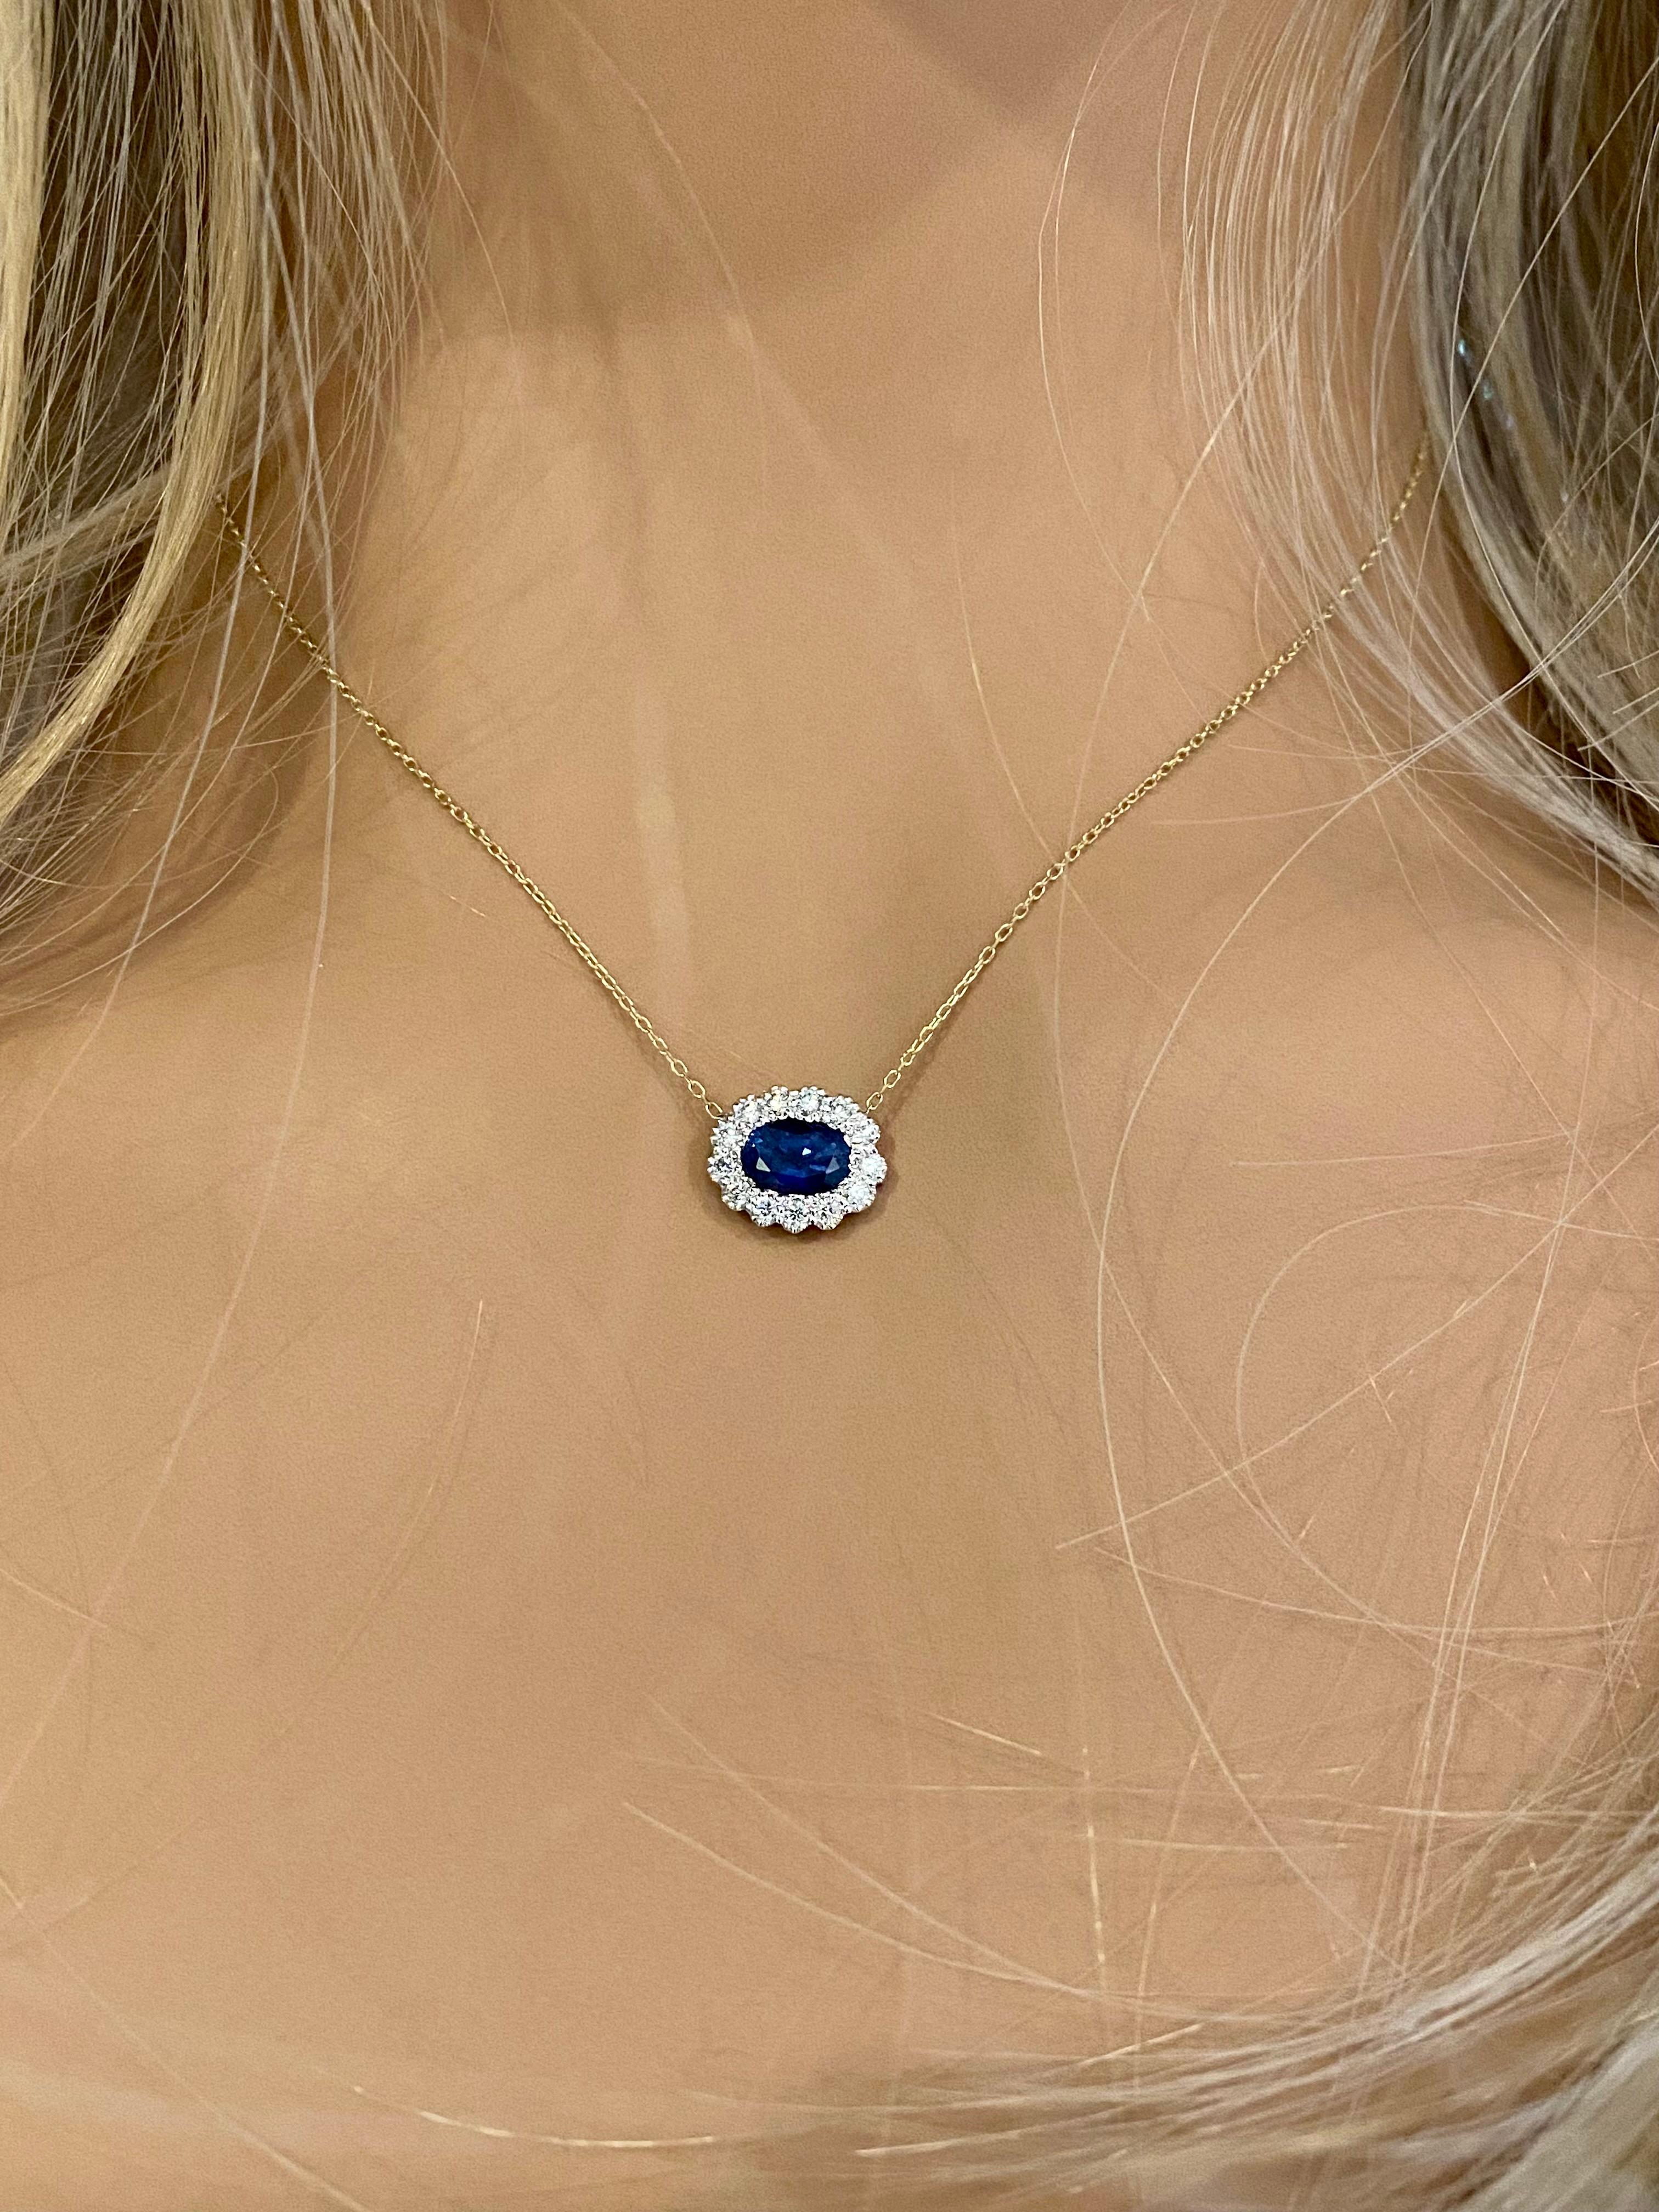 Contemporary Oval Sapphire Surrounded by Diamonds Gold Layered Necklace Pendant